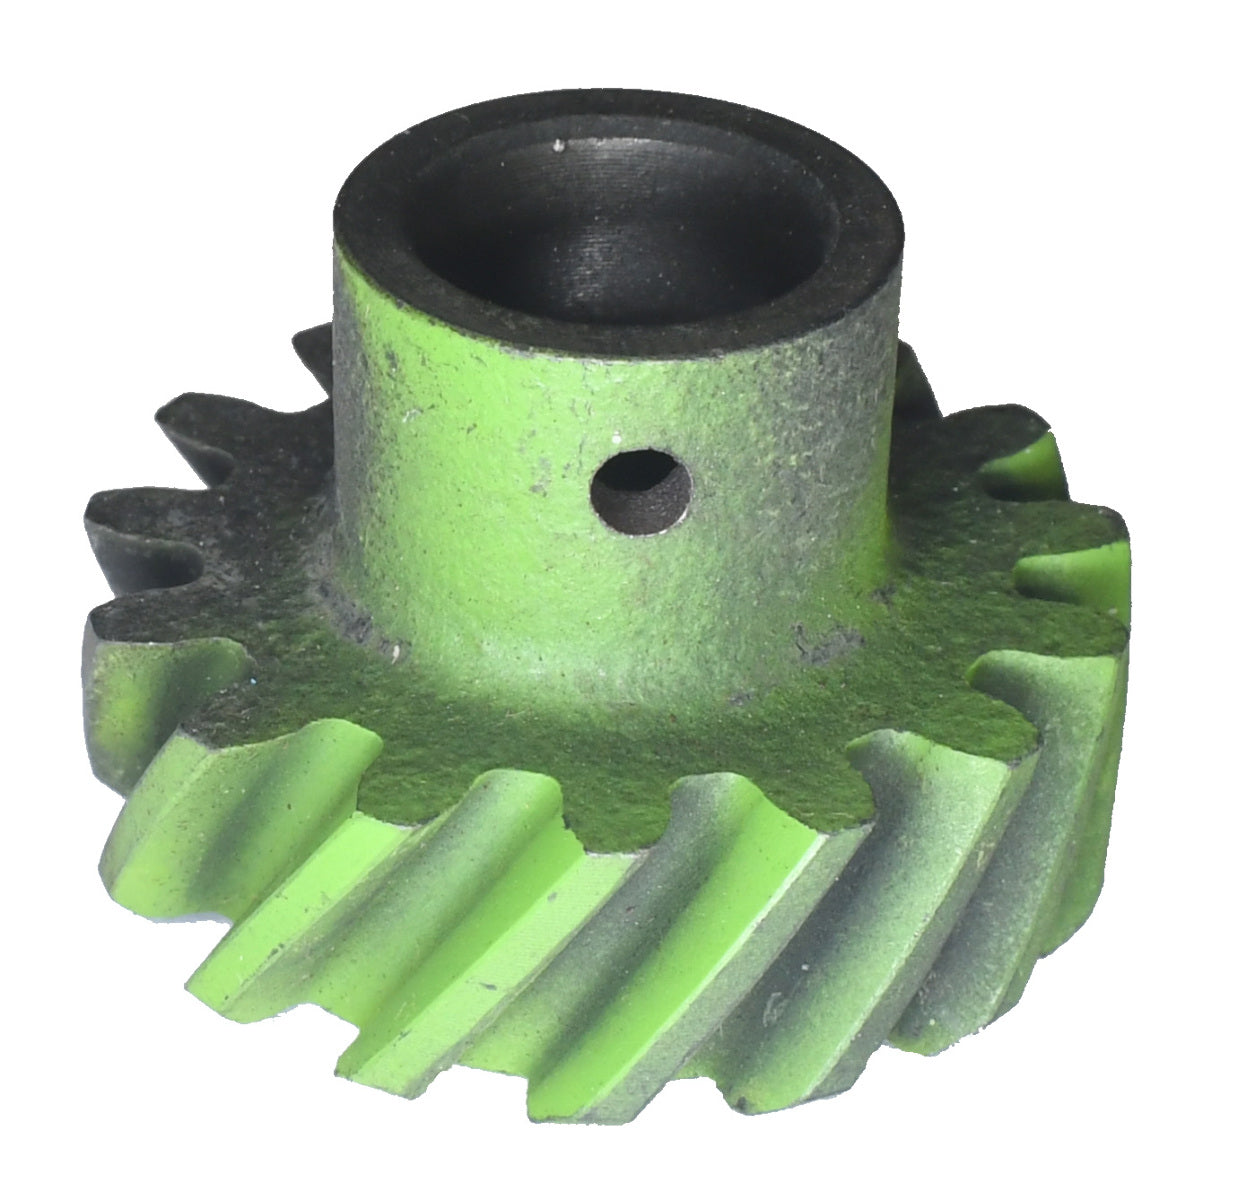 New distributor drive gear for select 1969-1989 Ford Lincoln Mercury engines